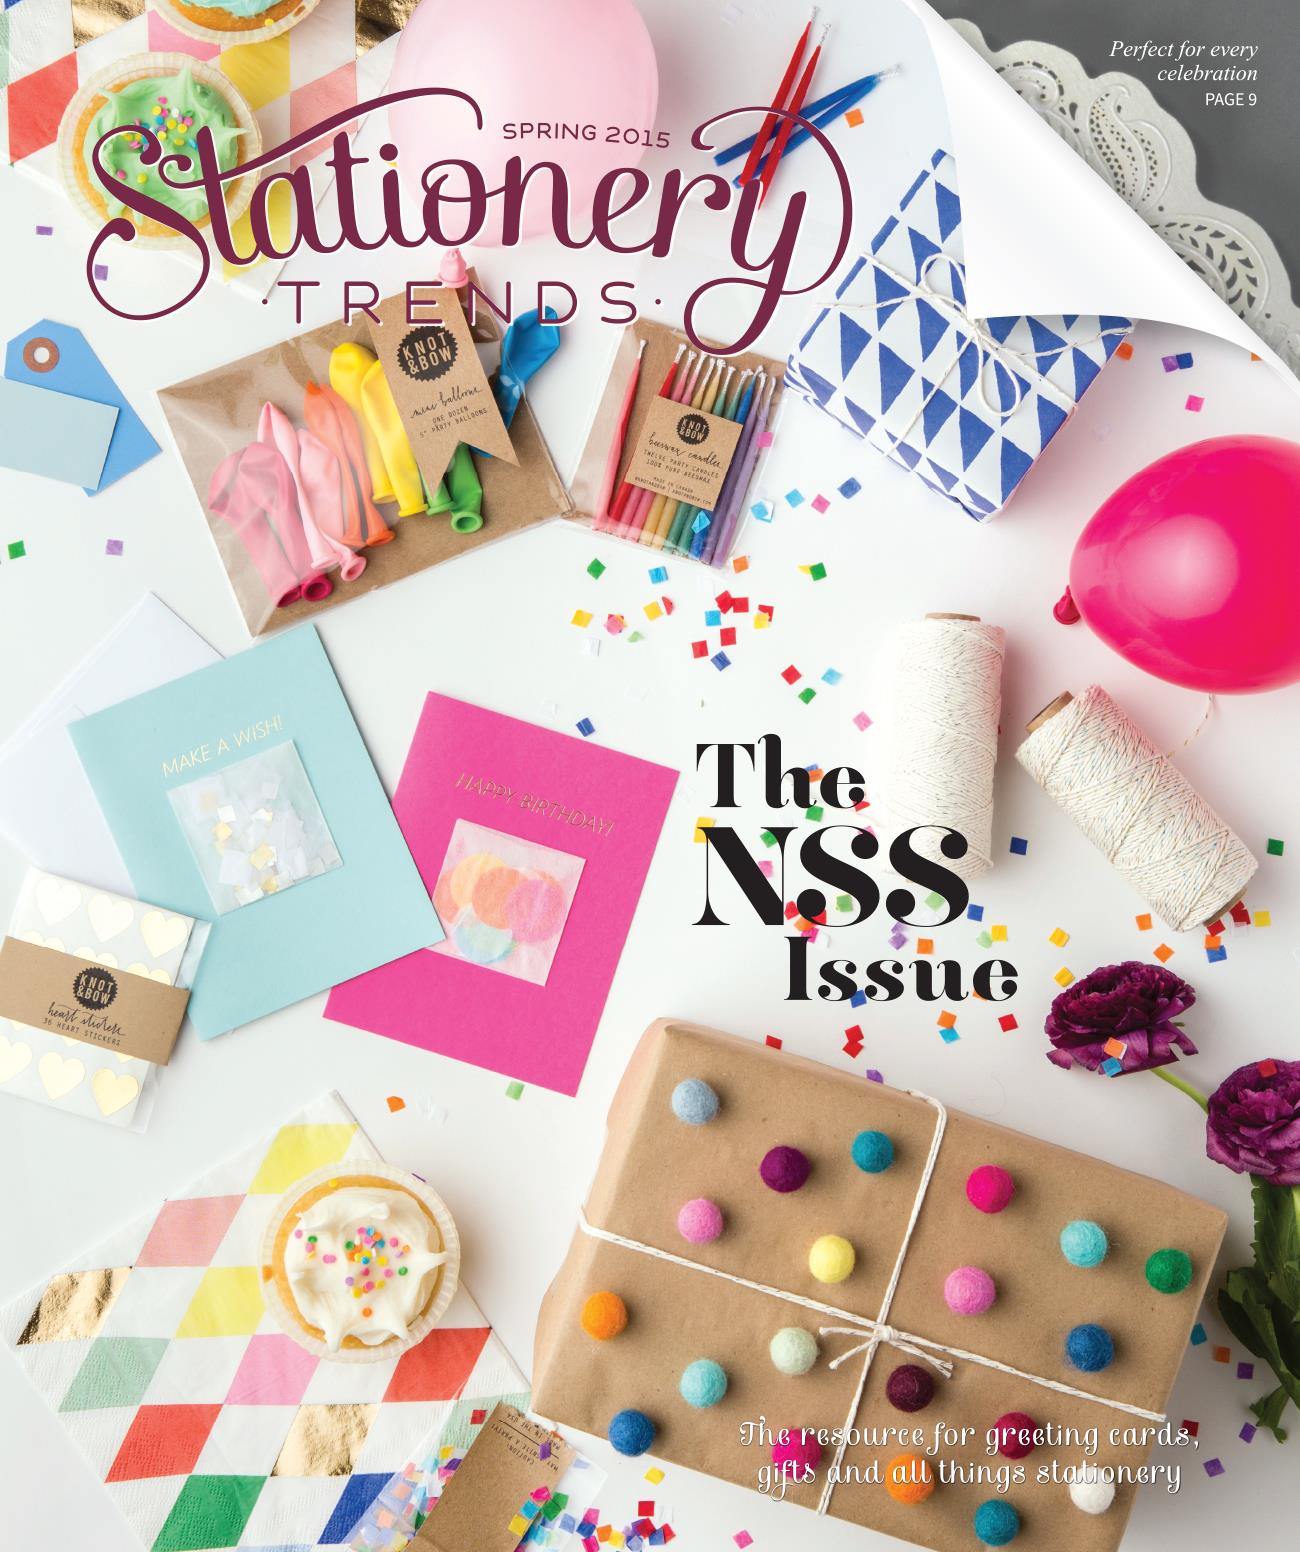 stationery-trends-cover.jpg